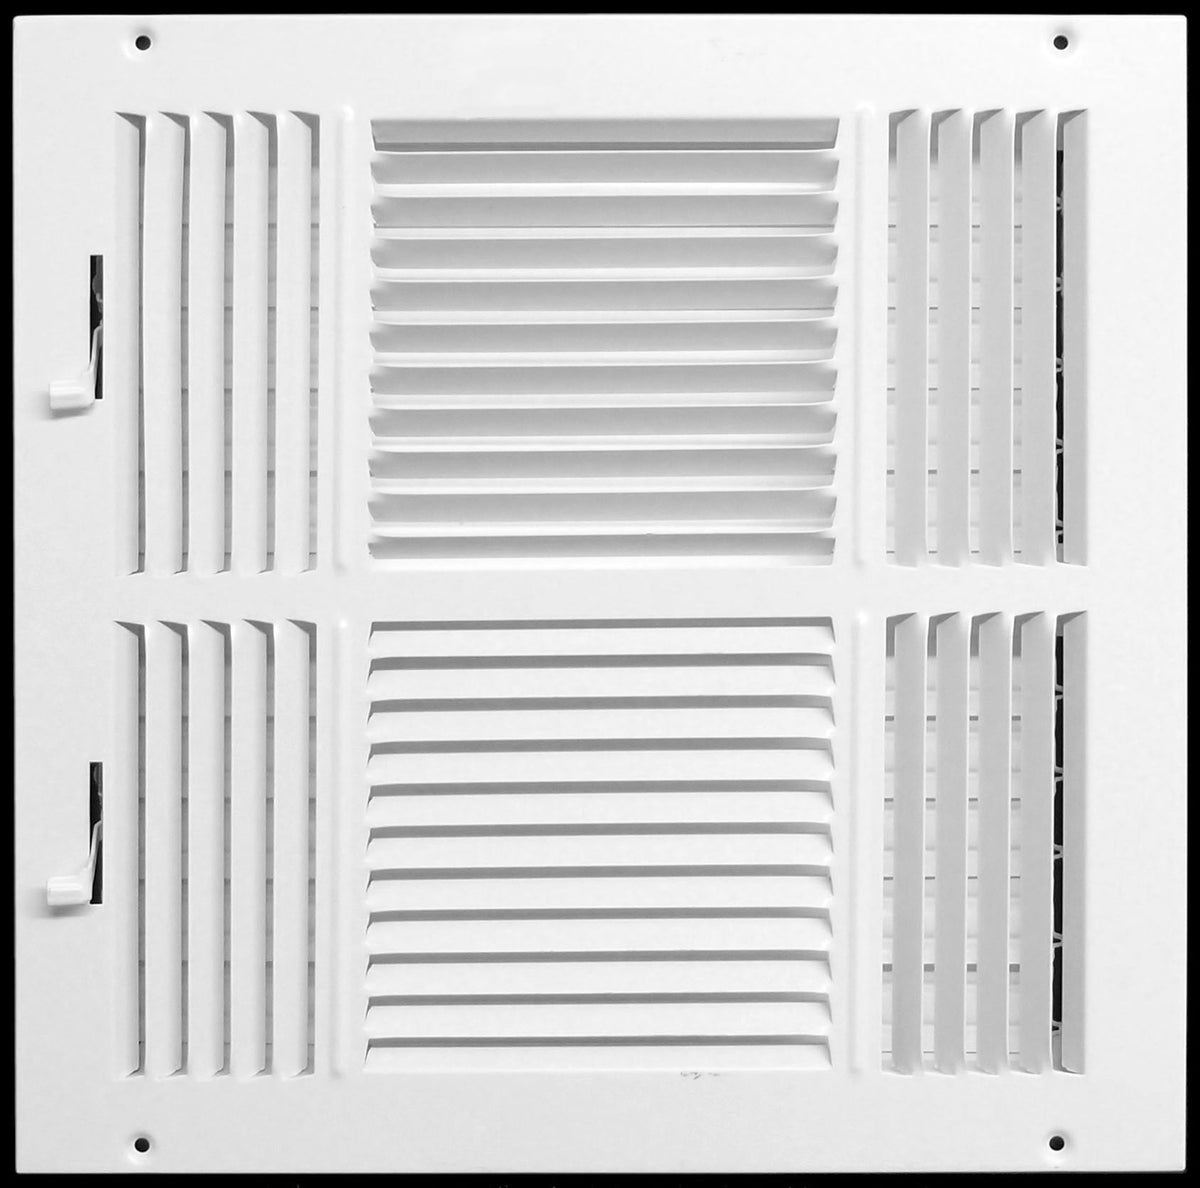 14&quot; X 10&quot; 4-Way AIR SUPPLY GRILLE - DUCT COVER &amp; DIFFUSER - Flat Stamped Face